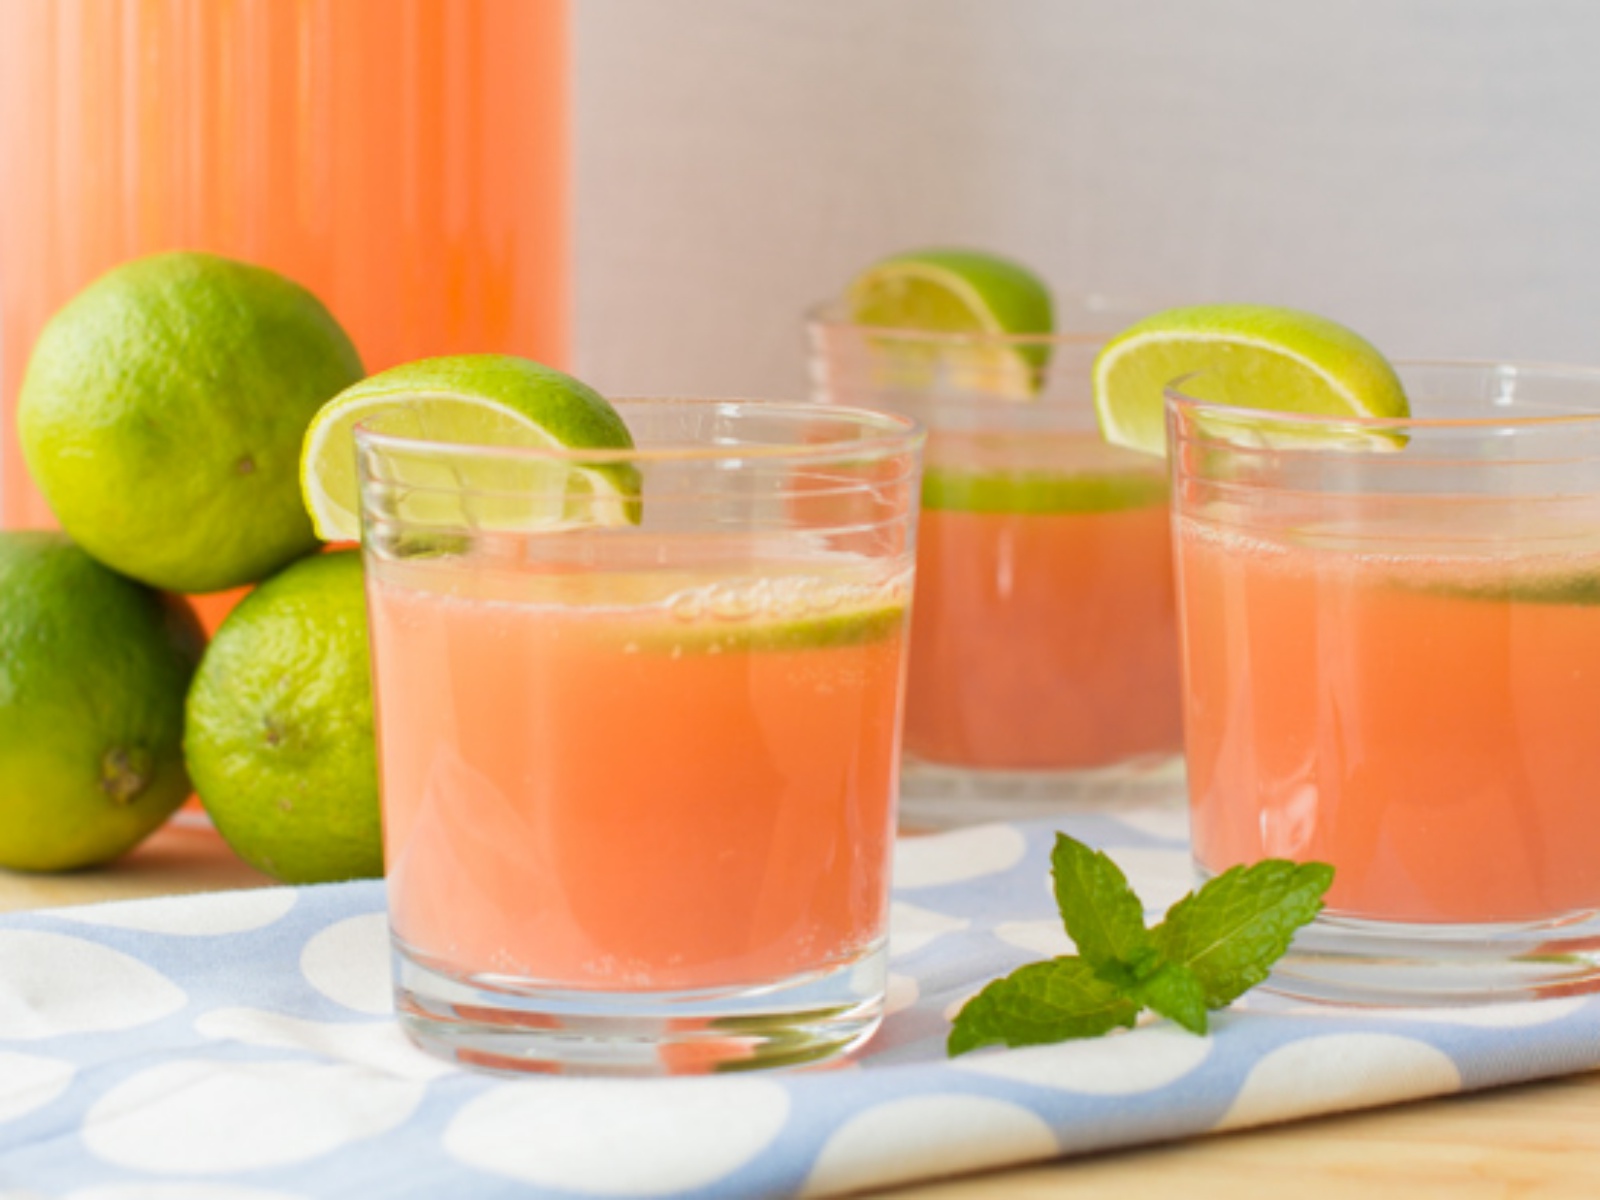 A fizzy and refreshing pink lemonade